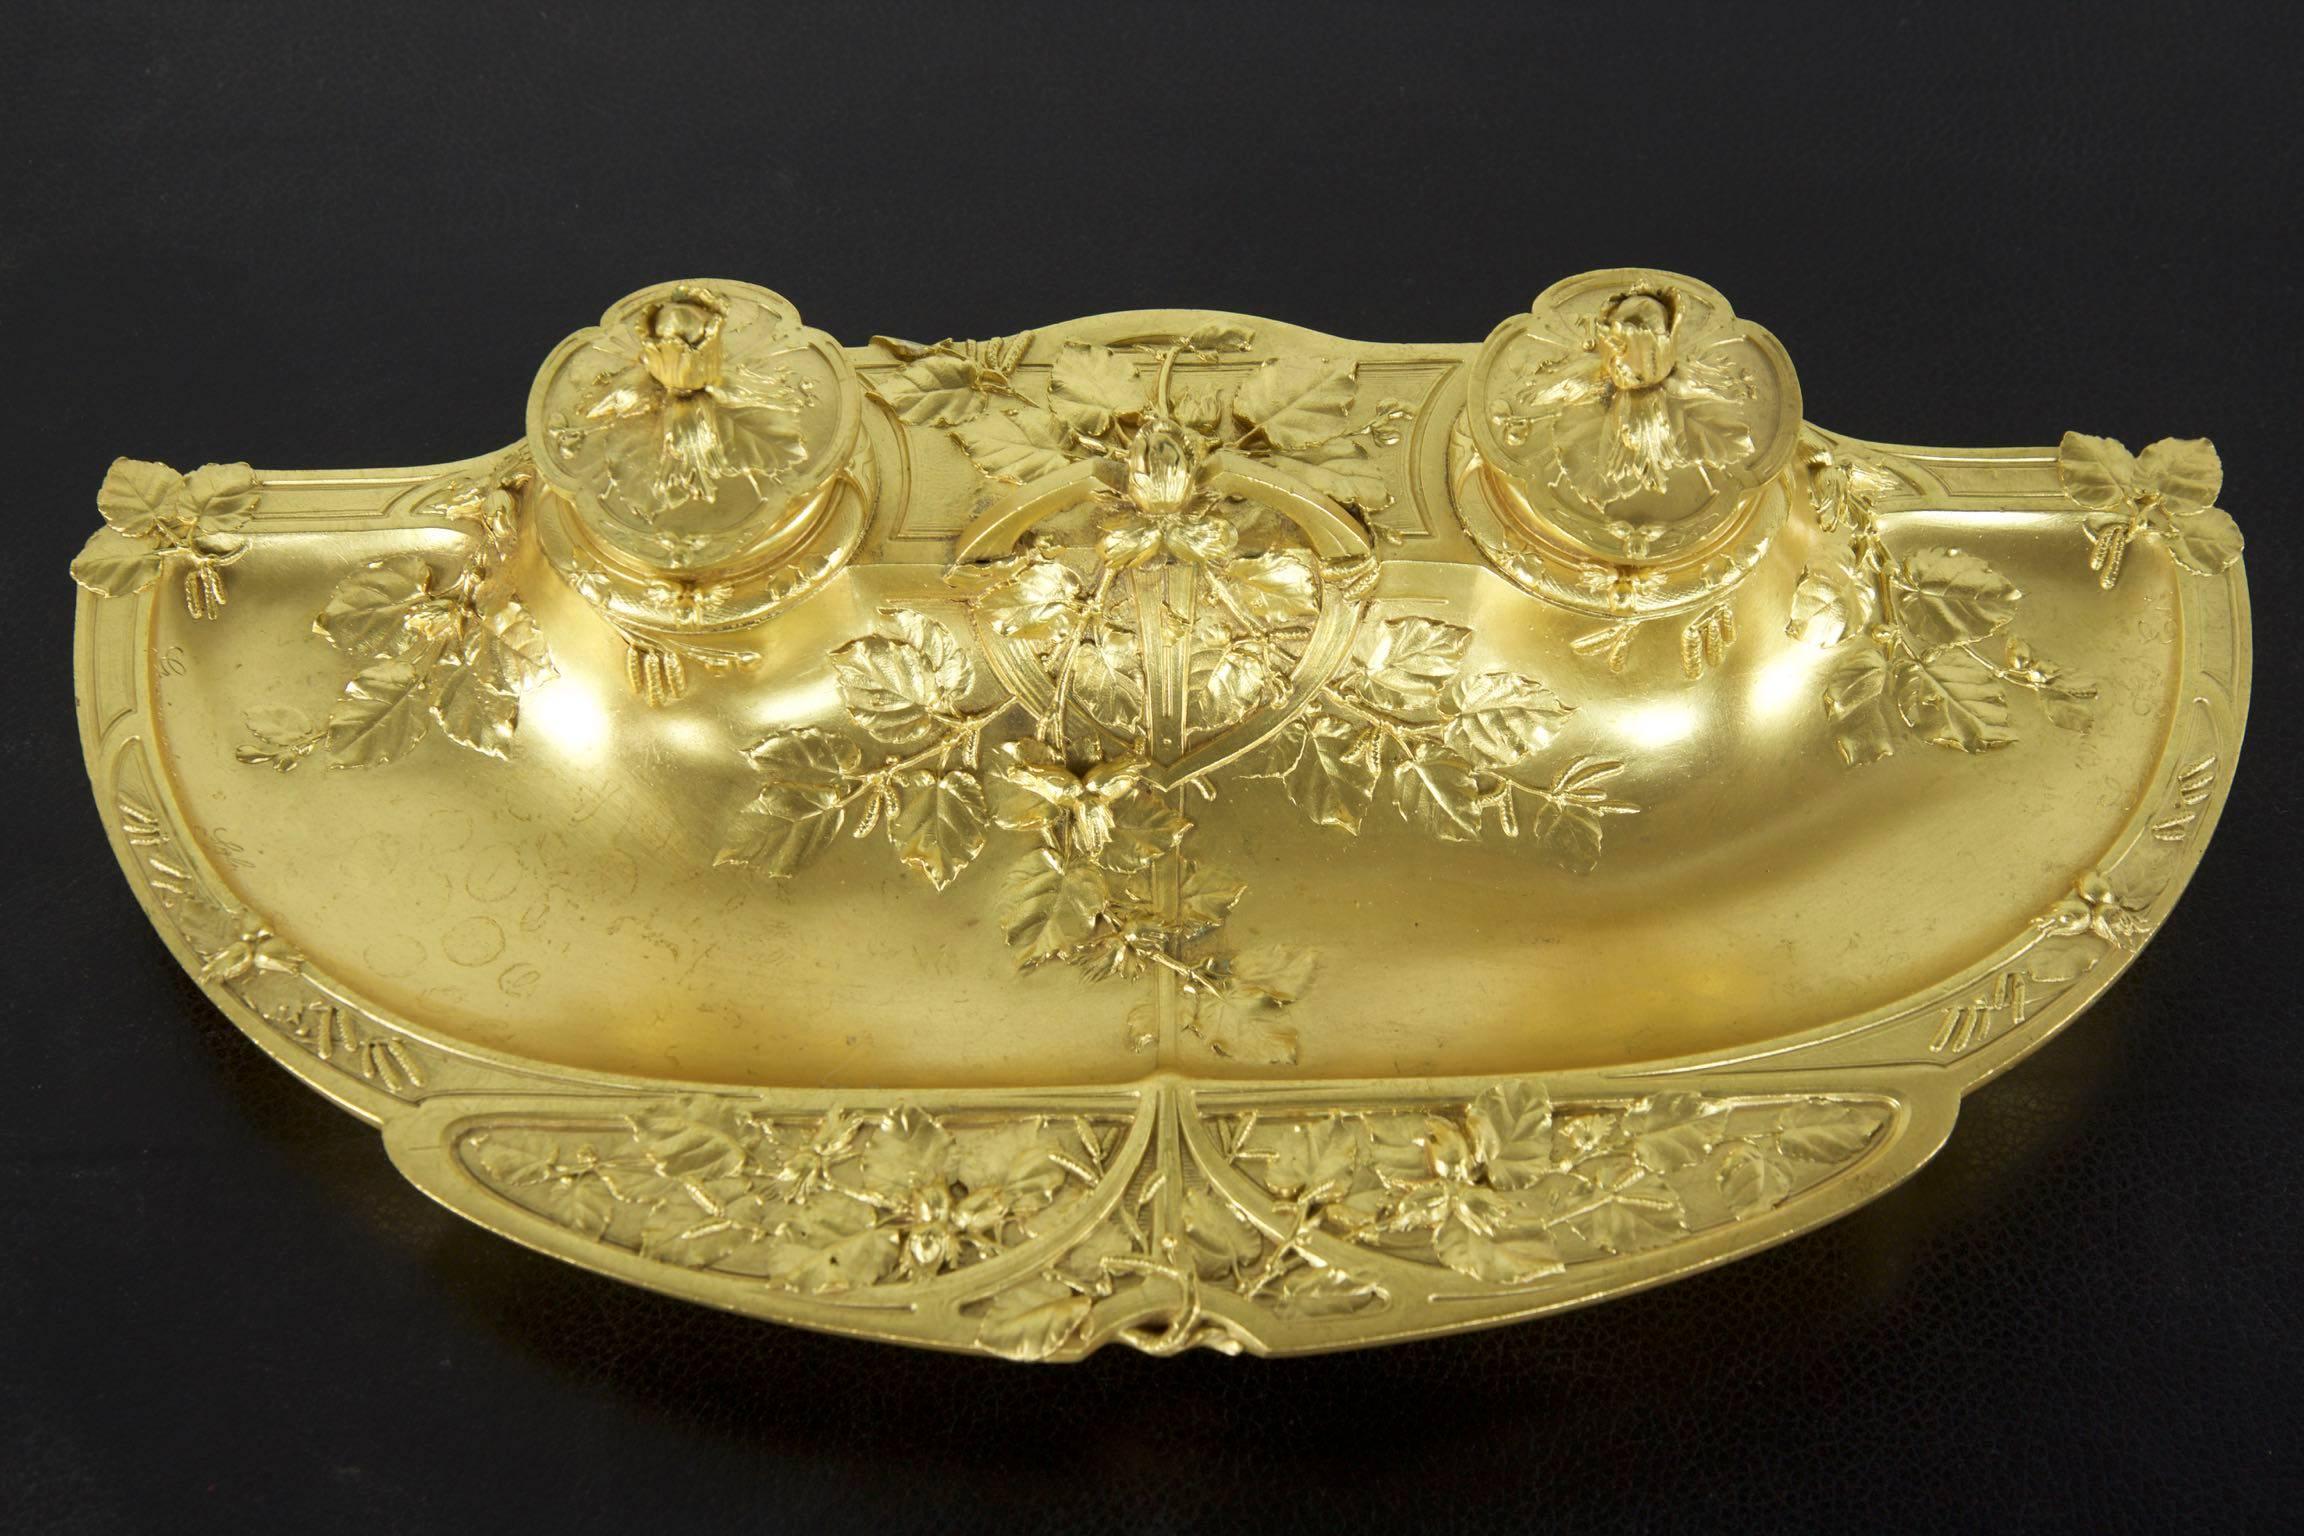 This is a remarkably complete gilt bronze writing suite by Susse Frères from the first quarter of the 20th century. It retains the original pen shaft (no tip), the well with an original pewter or lead cup insert, a very finely chiseled twin inkwell